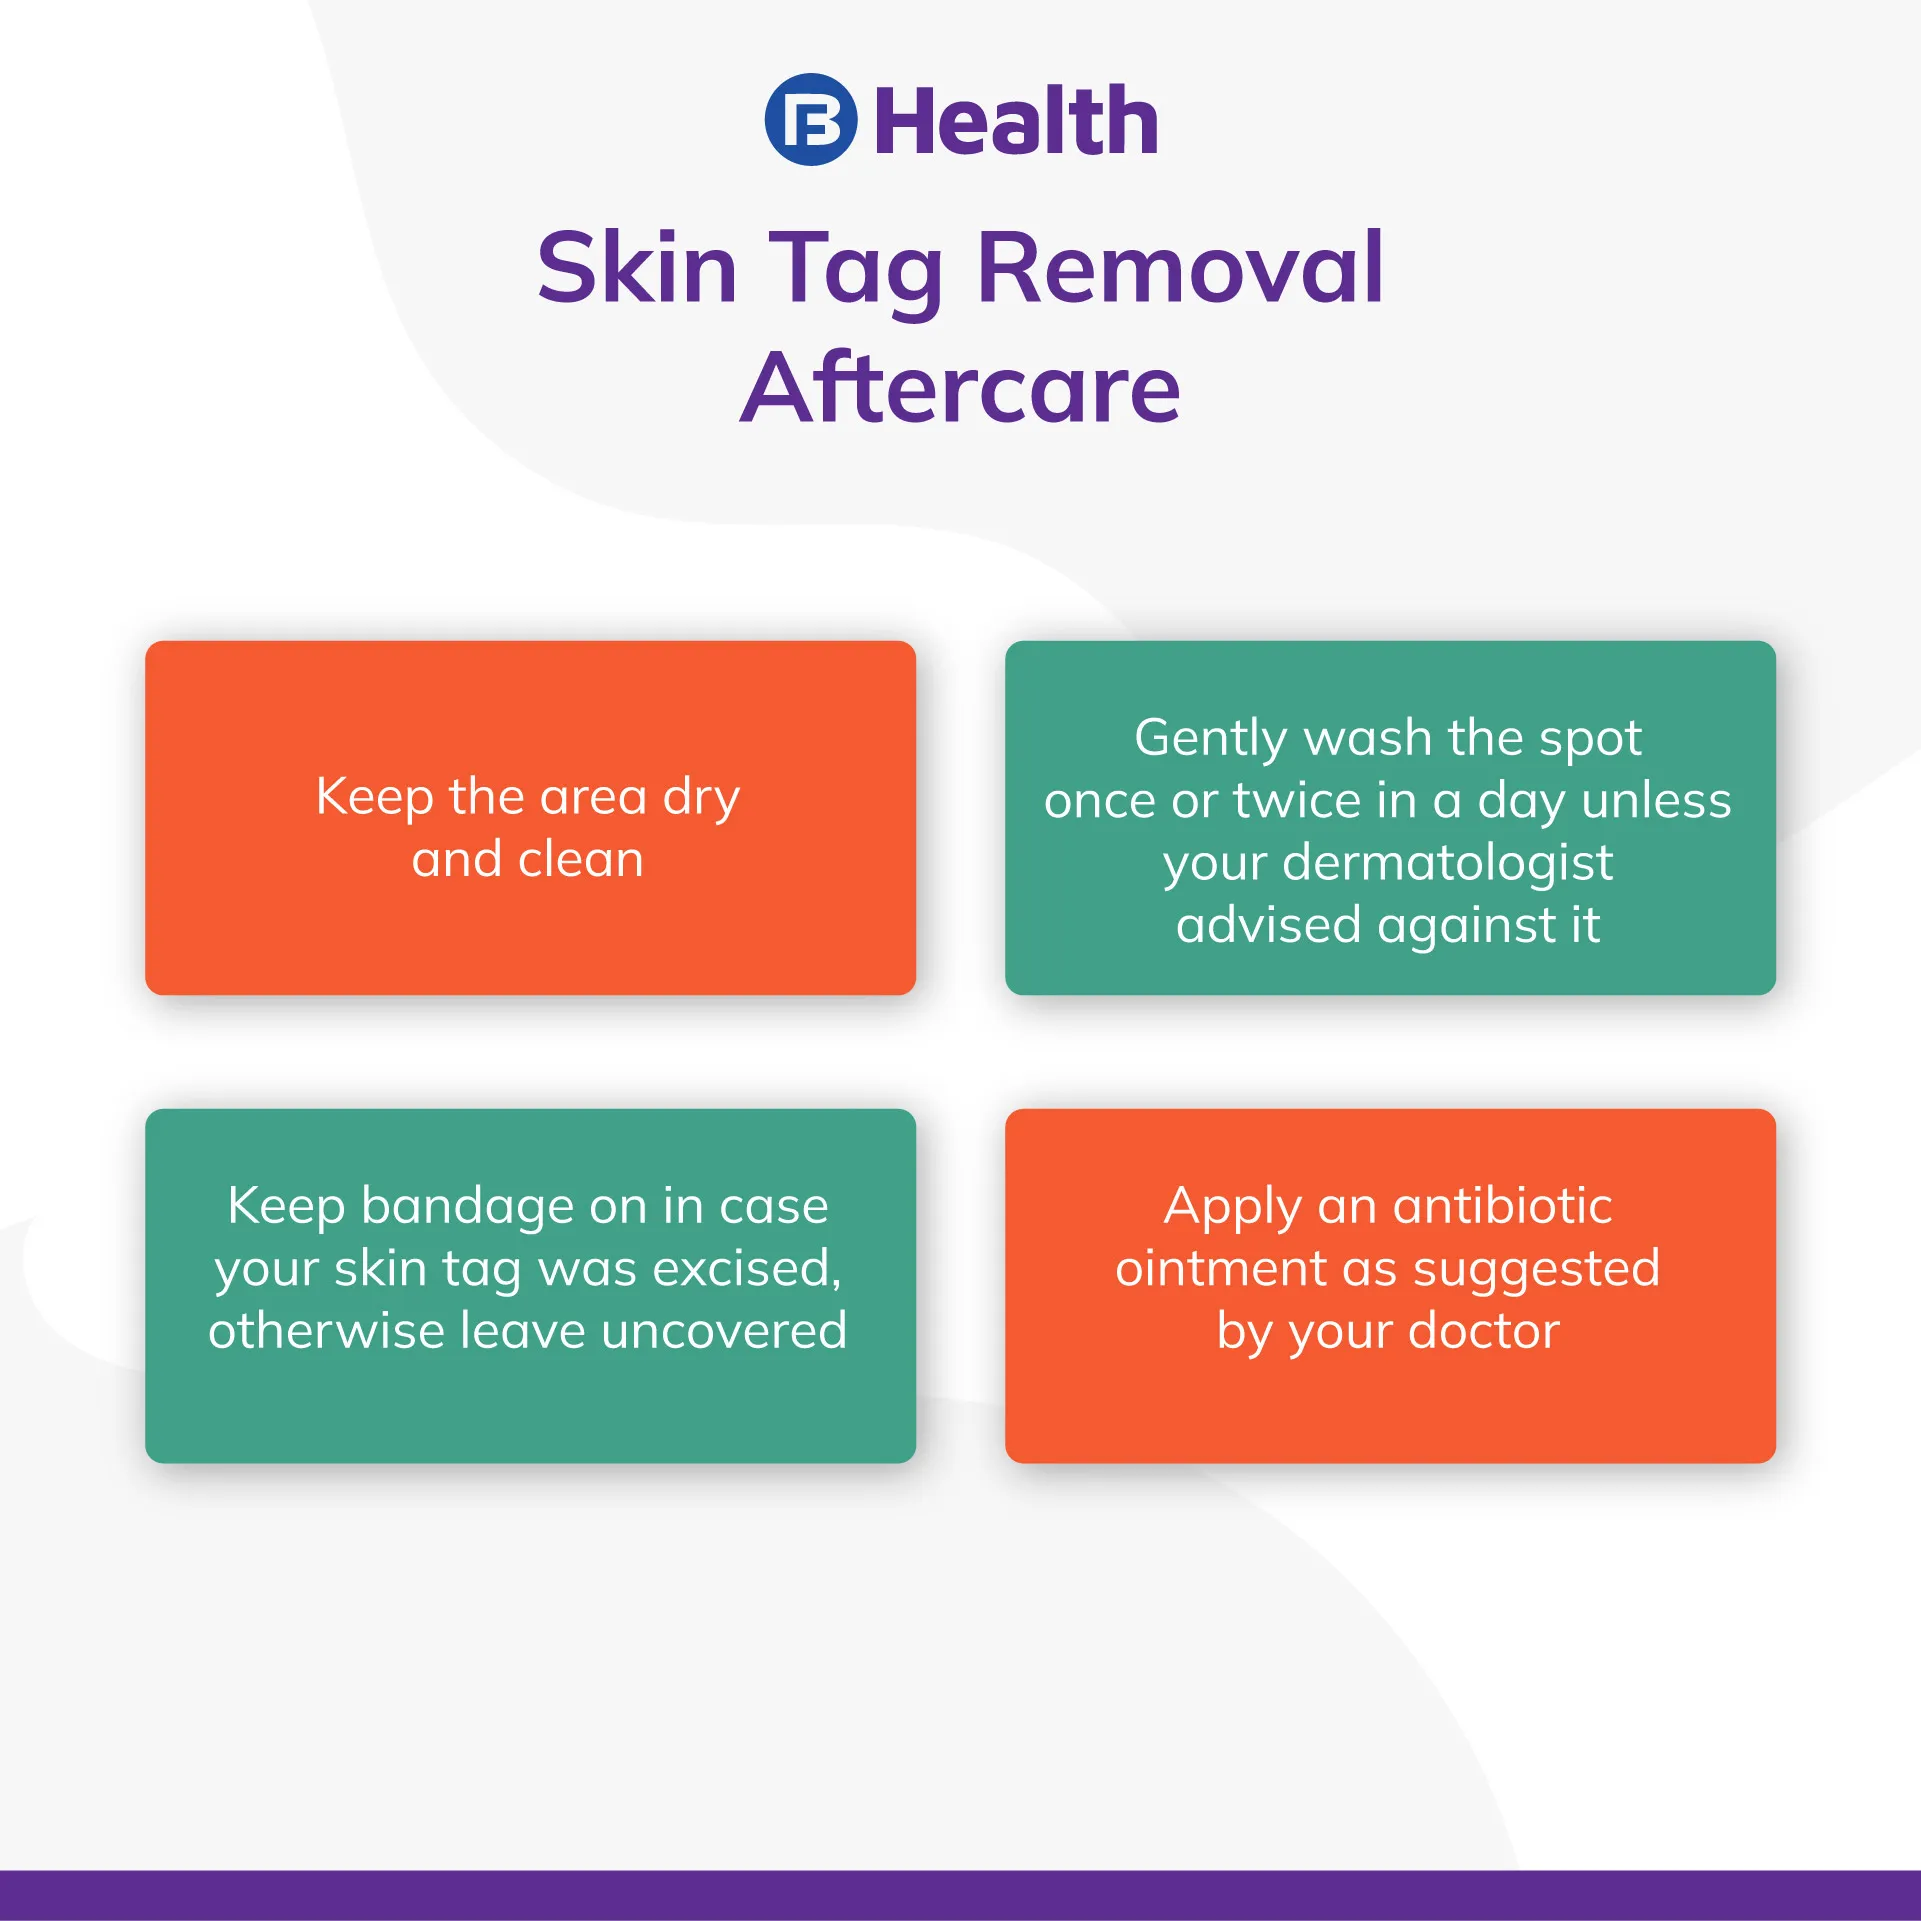 Skin Tag Removal aftercare